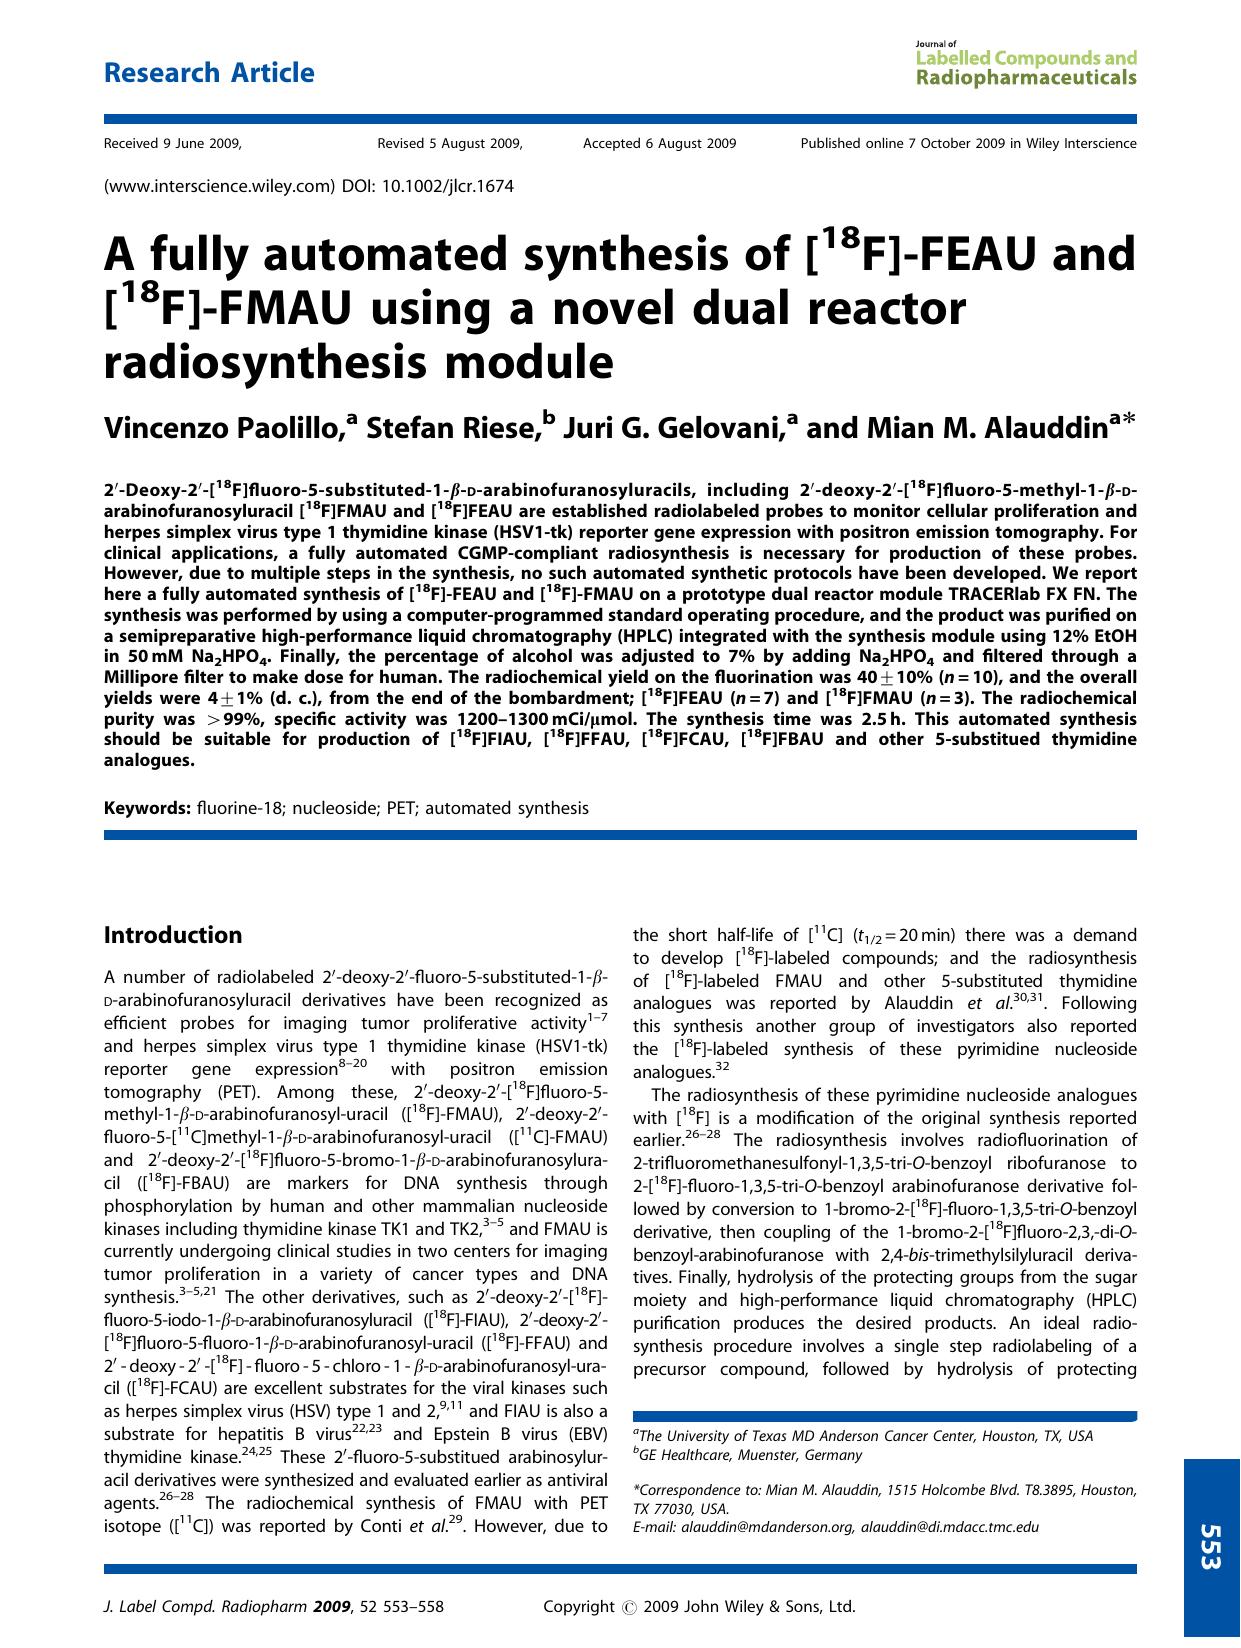 A fully automated synthesis of [18F]-FEAU and [18F]-FMAU using a novel dual reactor radiosynthesis module by Unknown